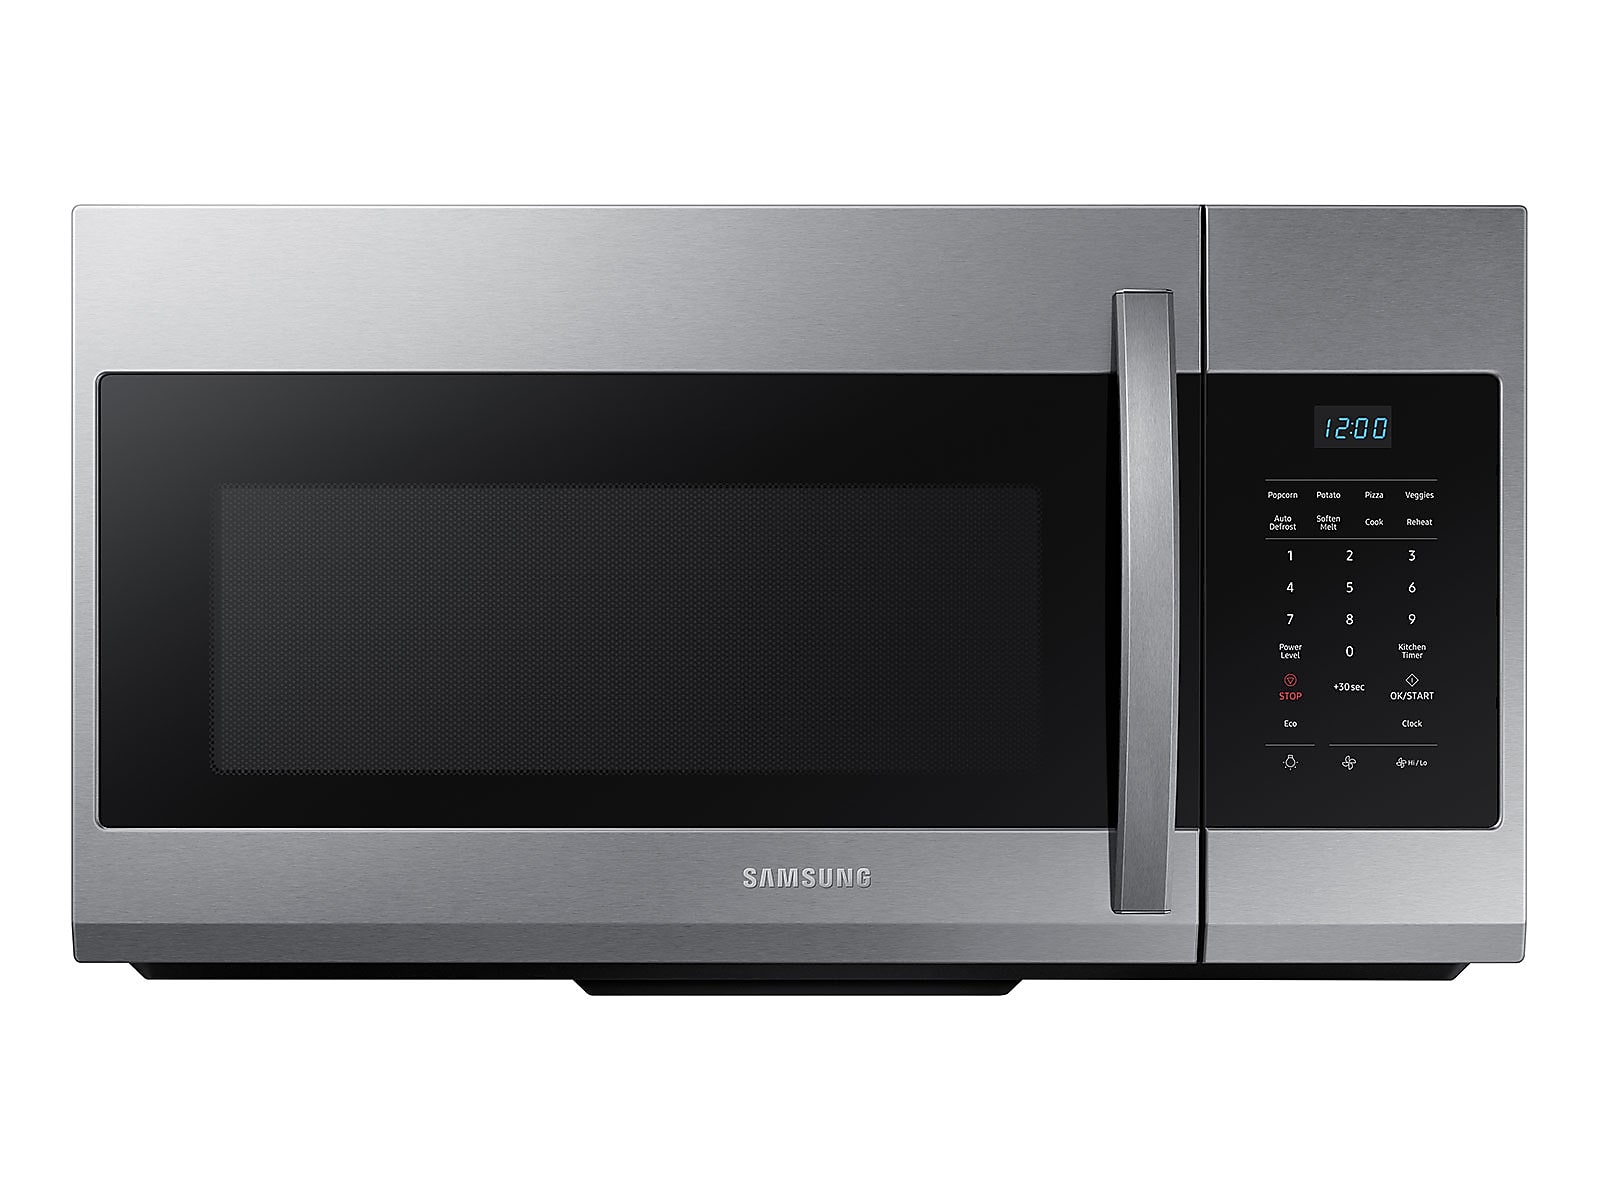 Samsung 1.7 cu. ft. Over-the-Range Microwave in Stainless Steel(ME17R7021ES/AA)